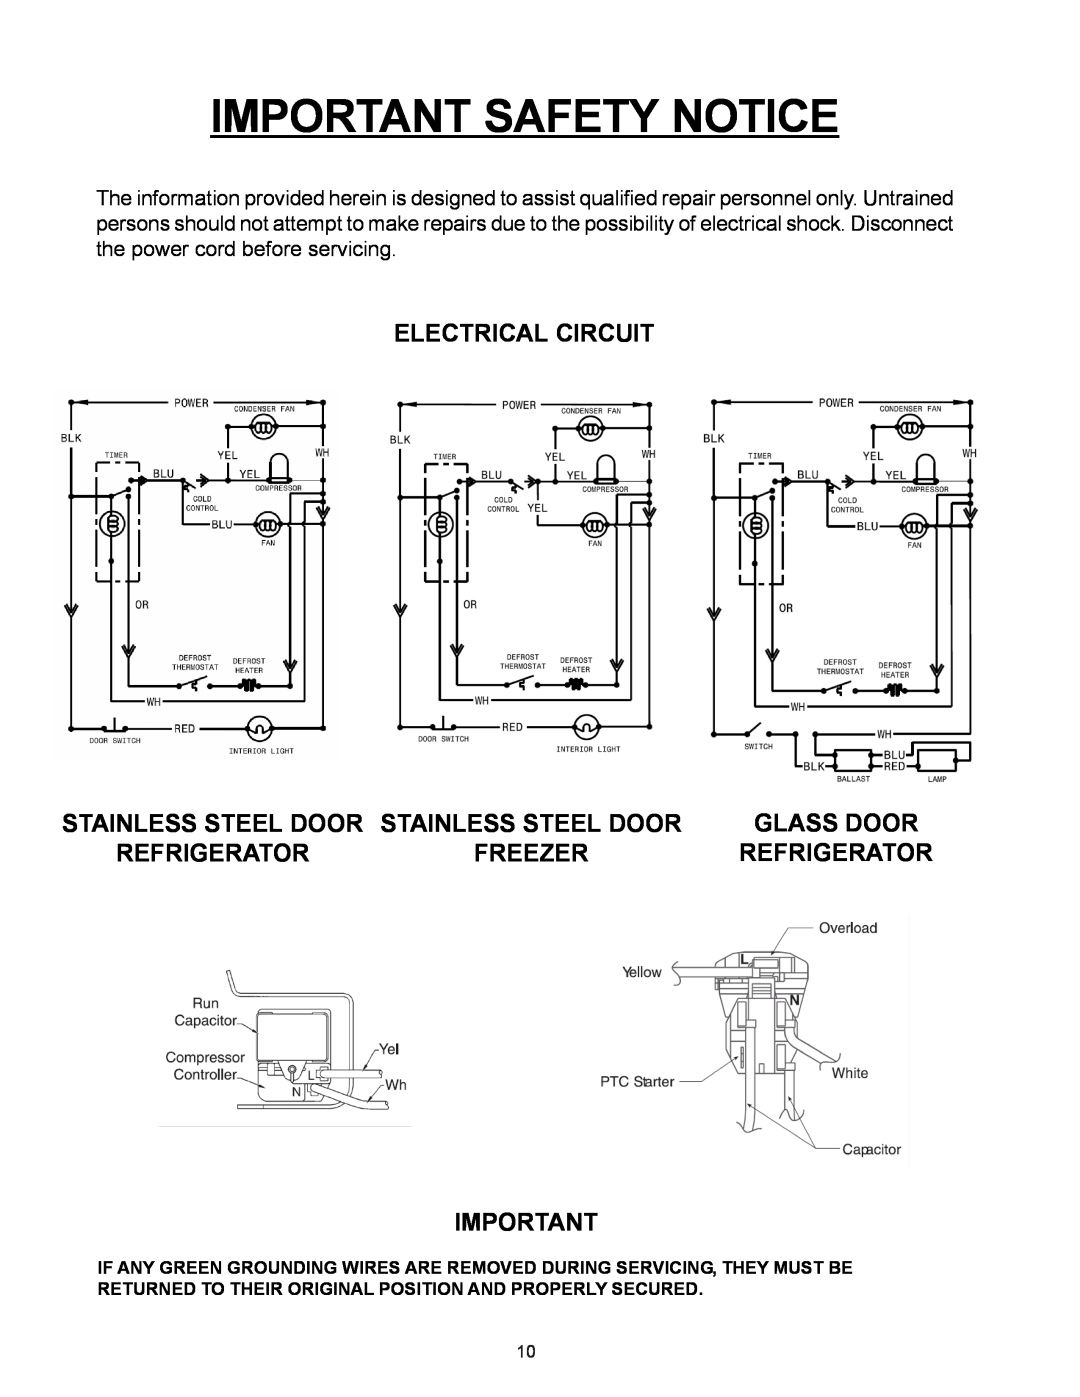 Frigidaire GLASS DOOR REFRIGERATOR Important Safety Notice, Electrical Circuit, Stainless Steel Door Stainless Steel Door 